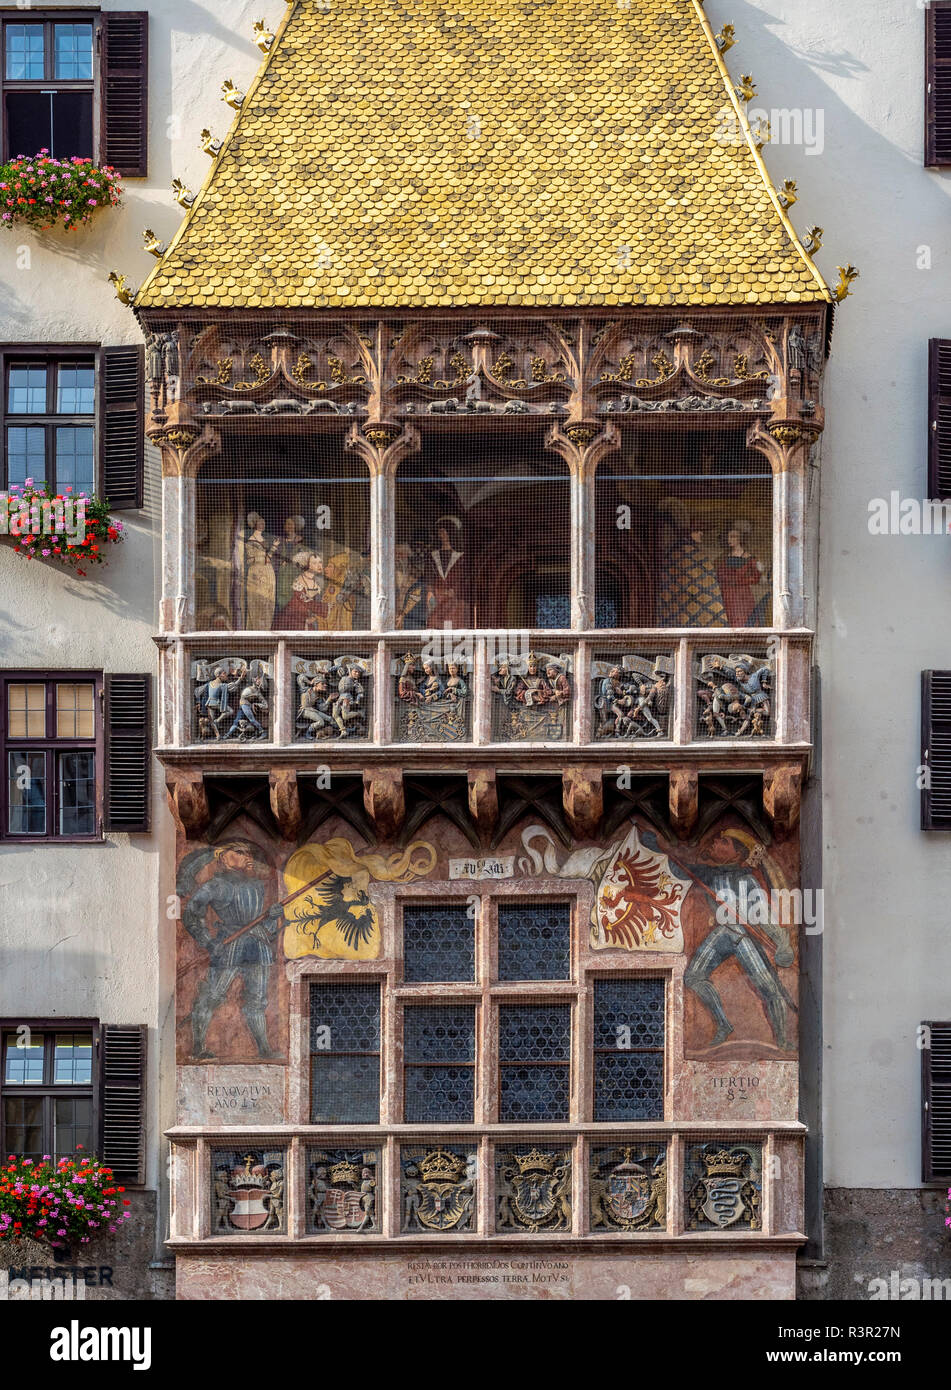 Goldenes Dachl or Golden Roof, late gothic alcove balcony, Innsbruck, Tyrol, Austria, Europe Stock Photo